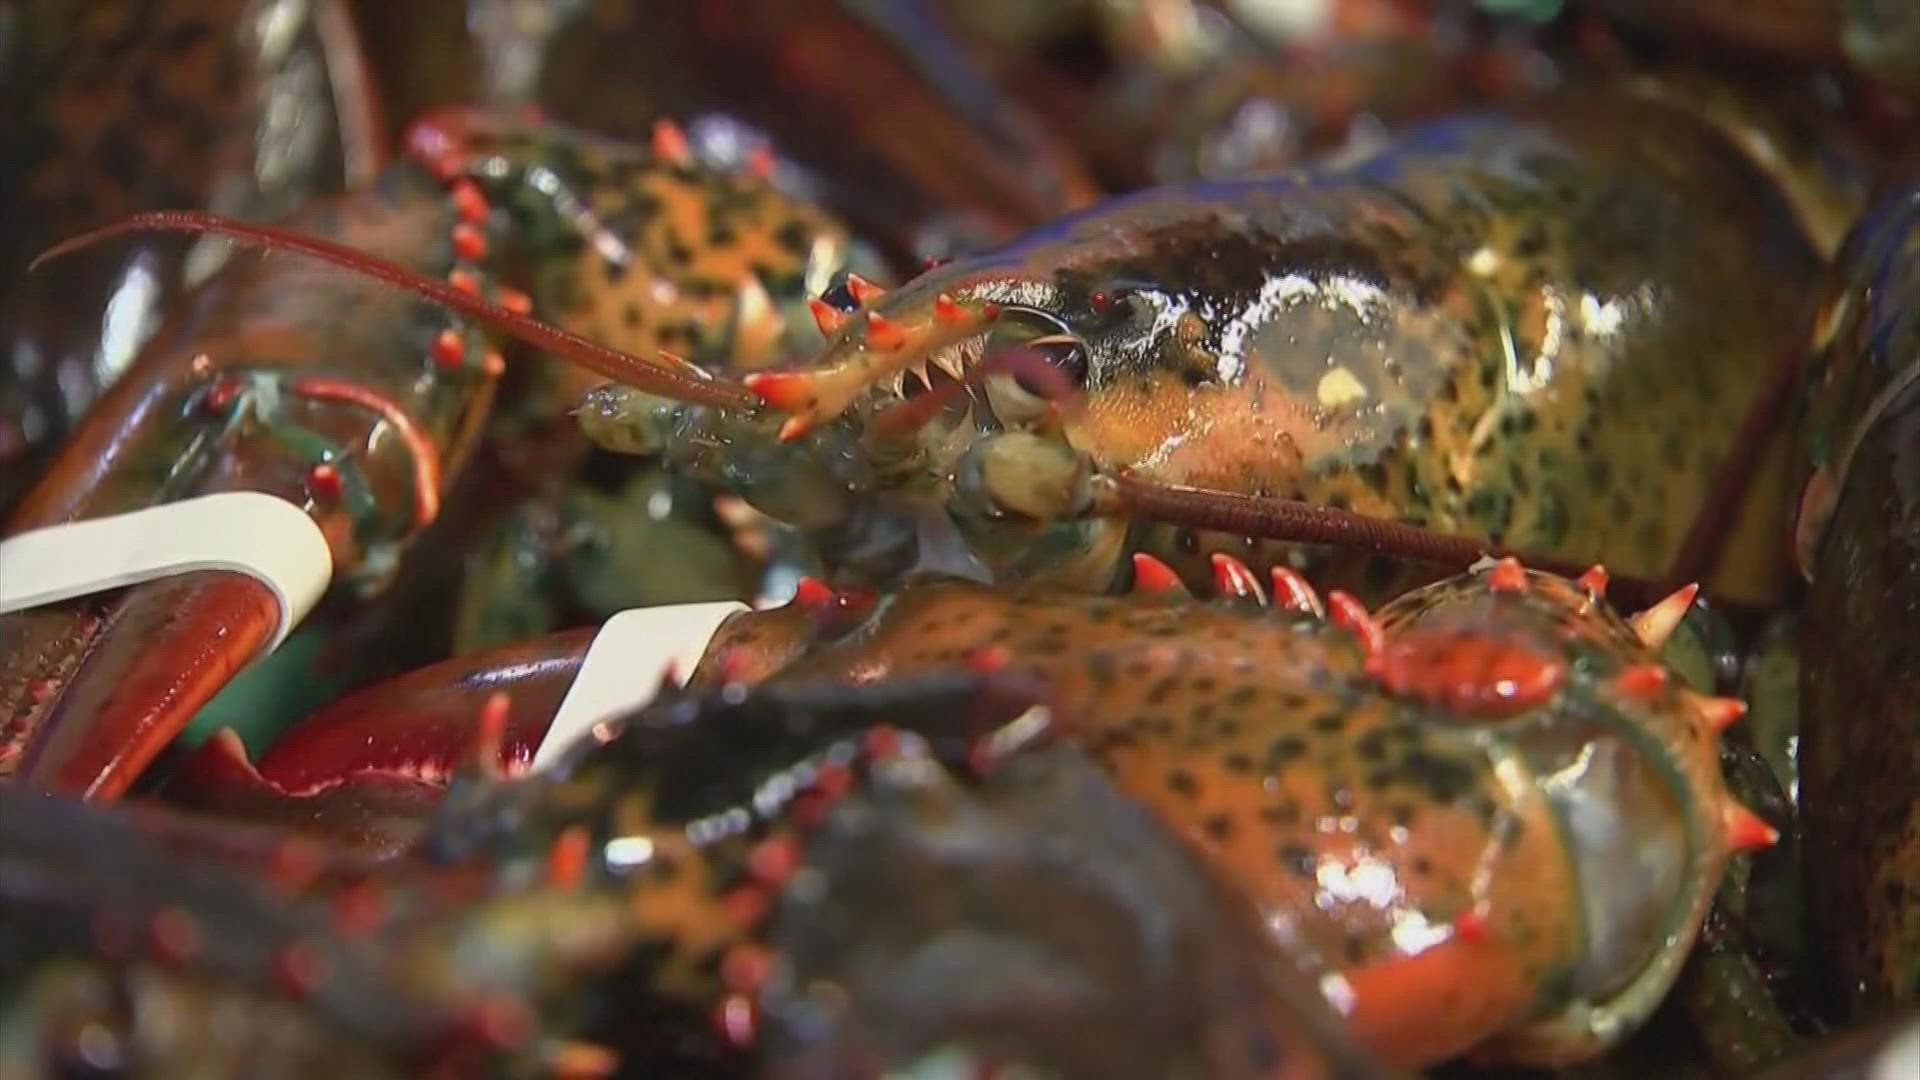 Dr. Jonathan Birch, who led a team of researchers in the UK, says that he watched experiments he says showed lobsters can act like a conscious animal.